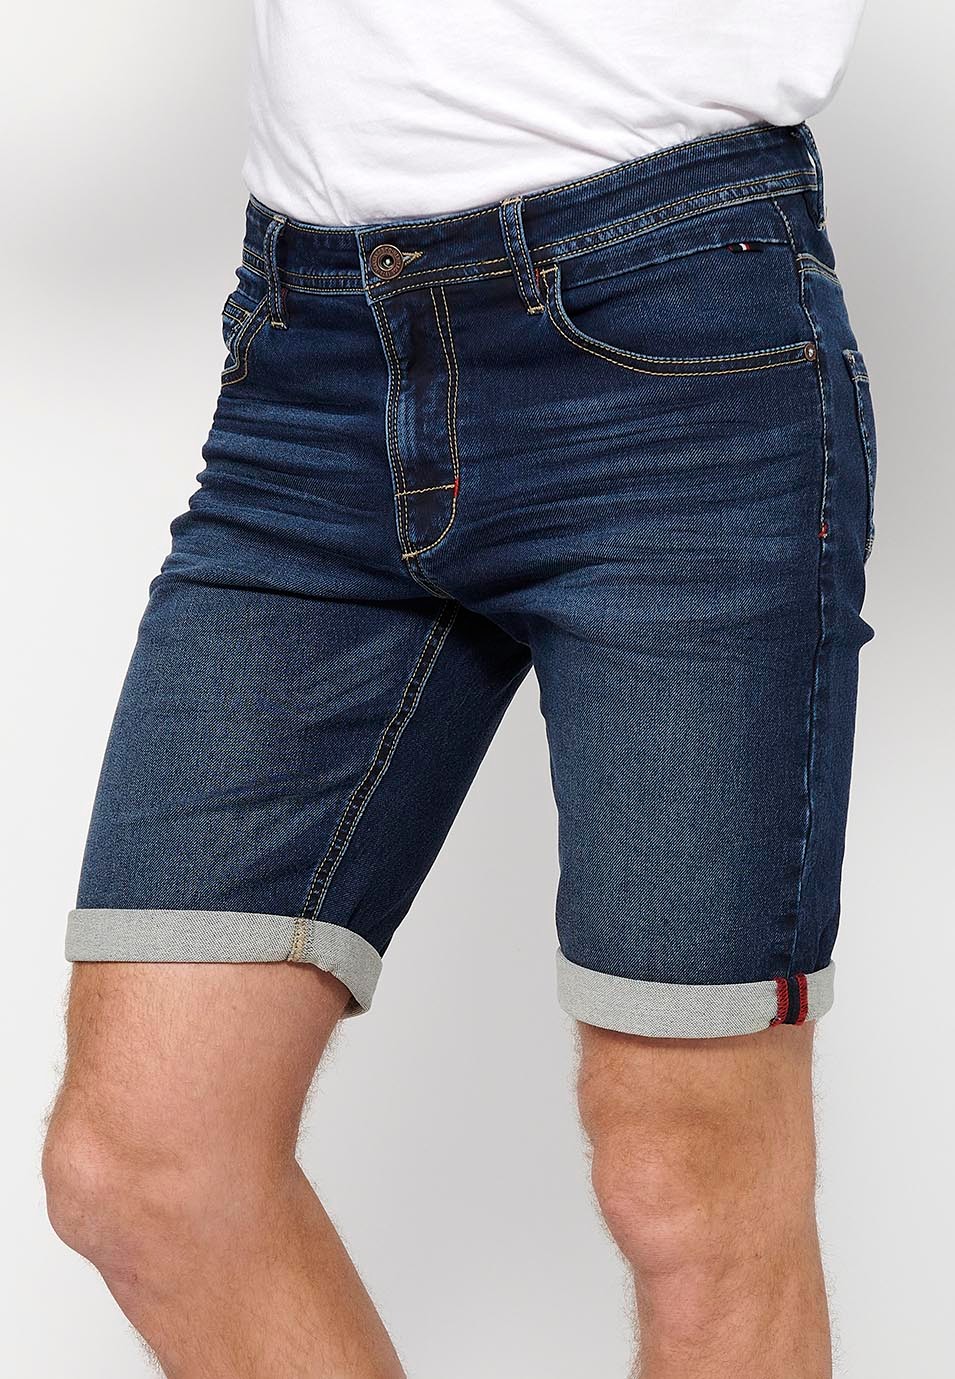 Shorts with turn-up finish with front closure with zipper and button in Blue for Men 2